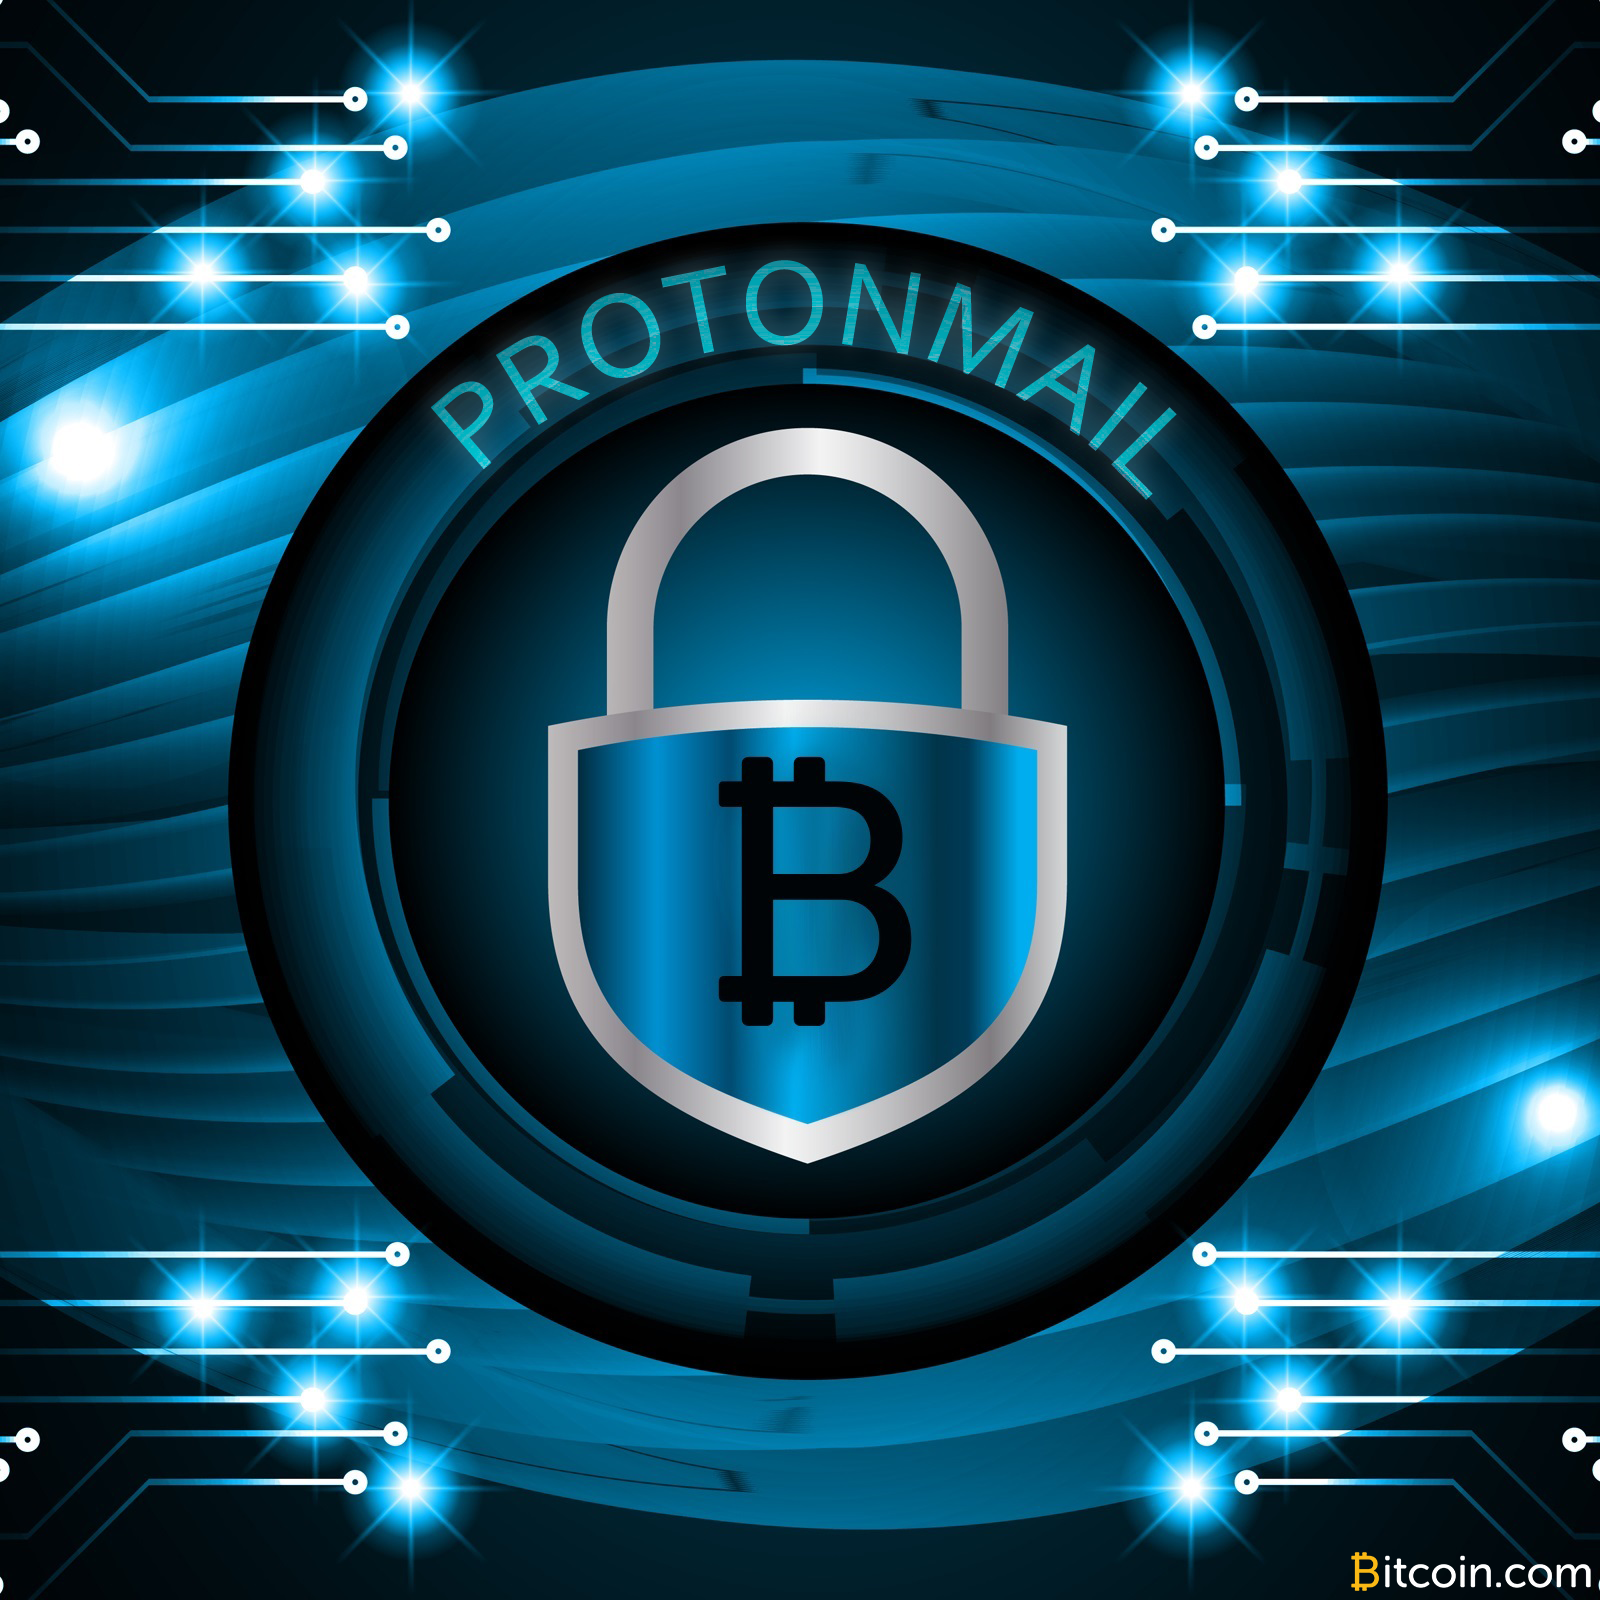 Protonmail's Beta Version Enables Automated Bitcoin Payments